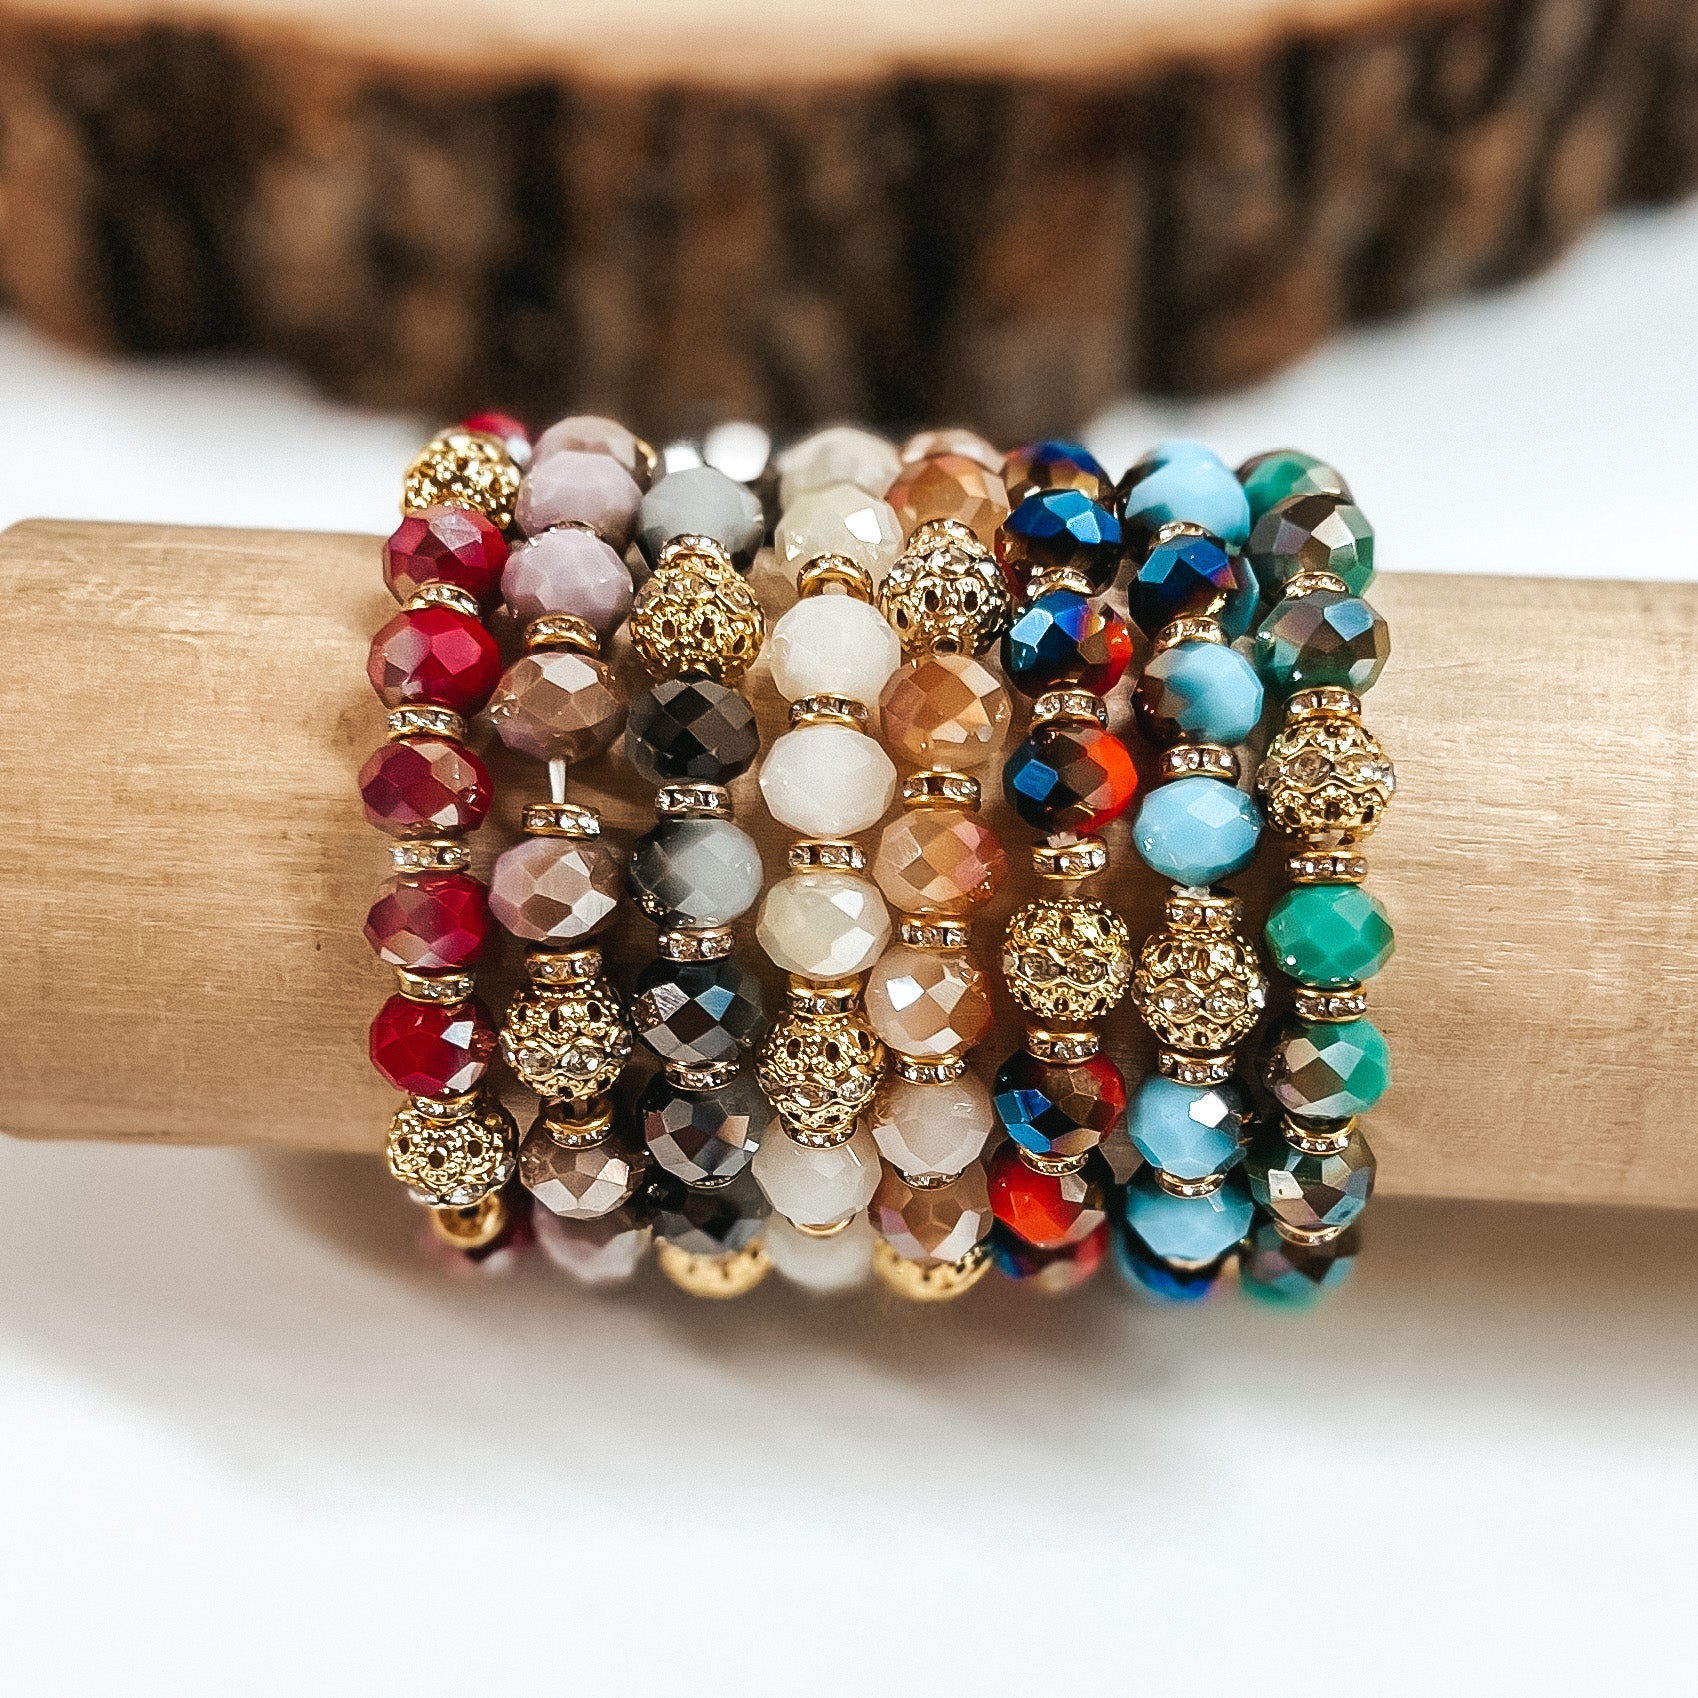 There are eight crystal beaded bracelets in different colors and textures taken on a bracelet wood holder. These bracelets are takekn on a white background with a slab of wood in the back as decor.